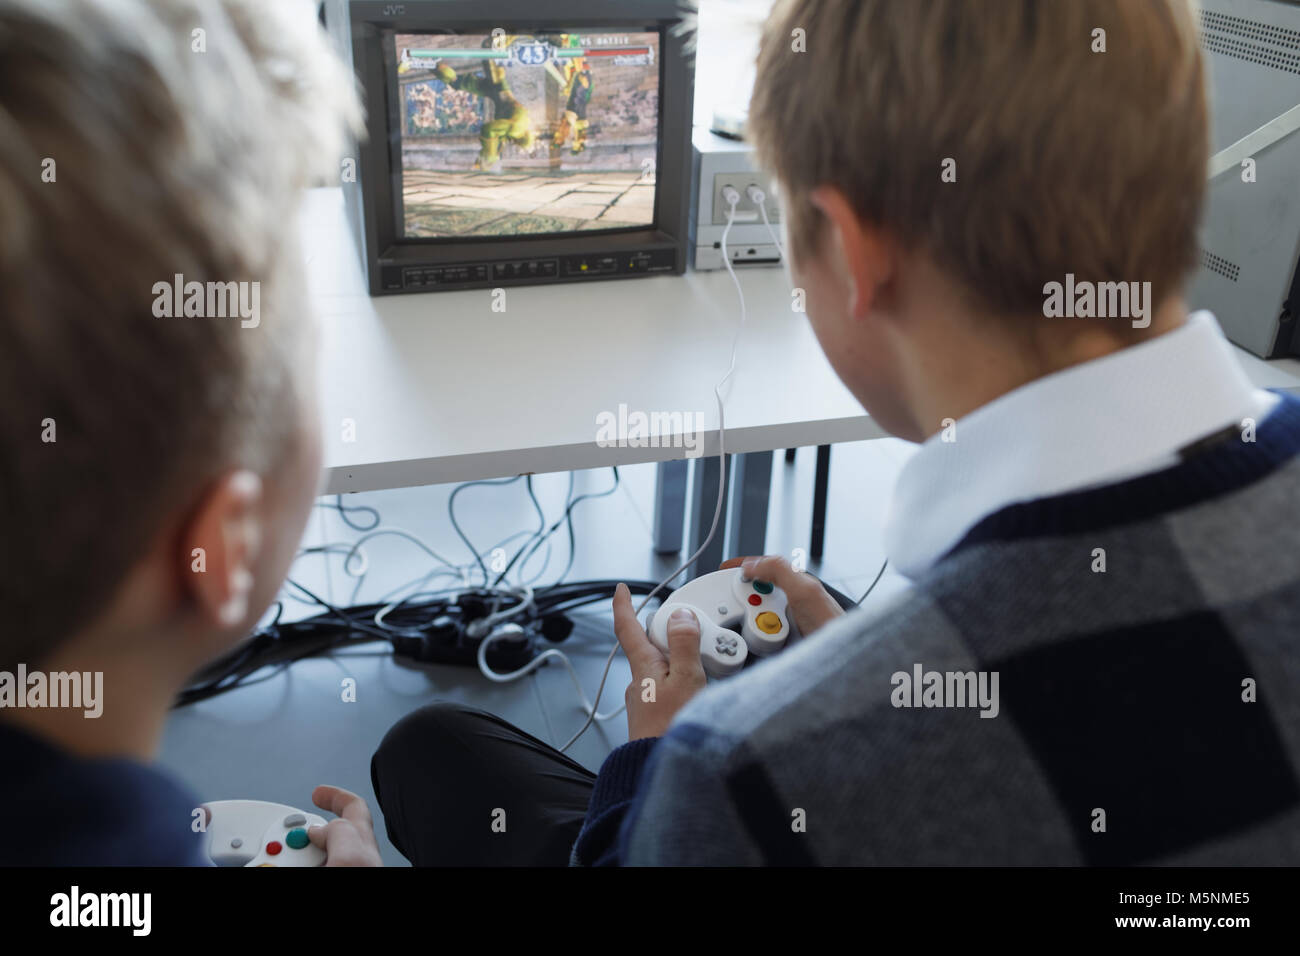 St. Petersburg, Russia - February 22, 2018: People playing with retro video game consoles on the exhibition of retro computers during St. Petersburg C Stock Photo